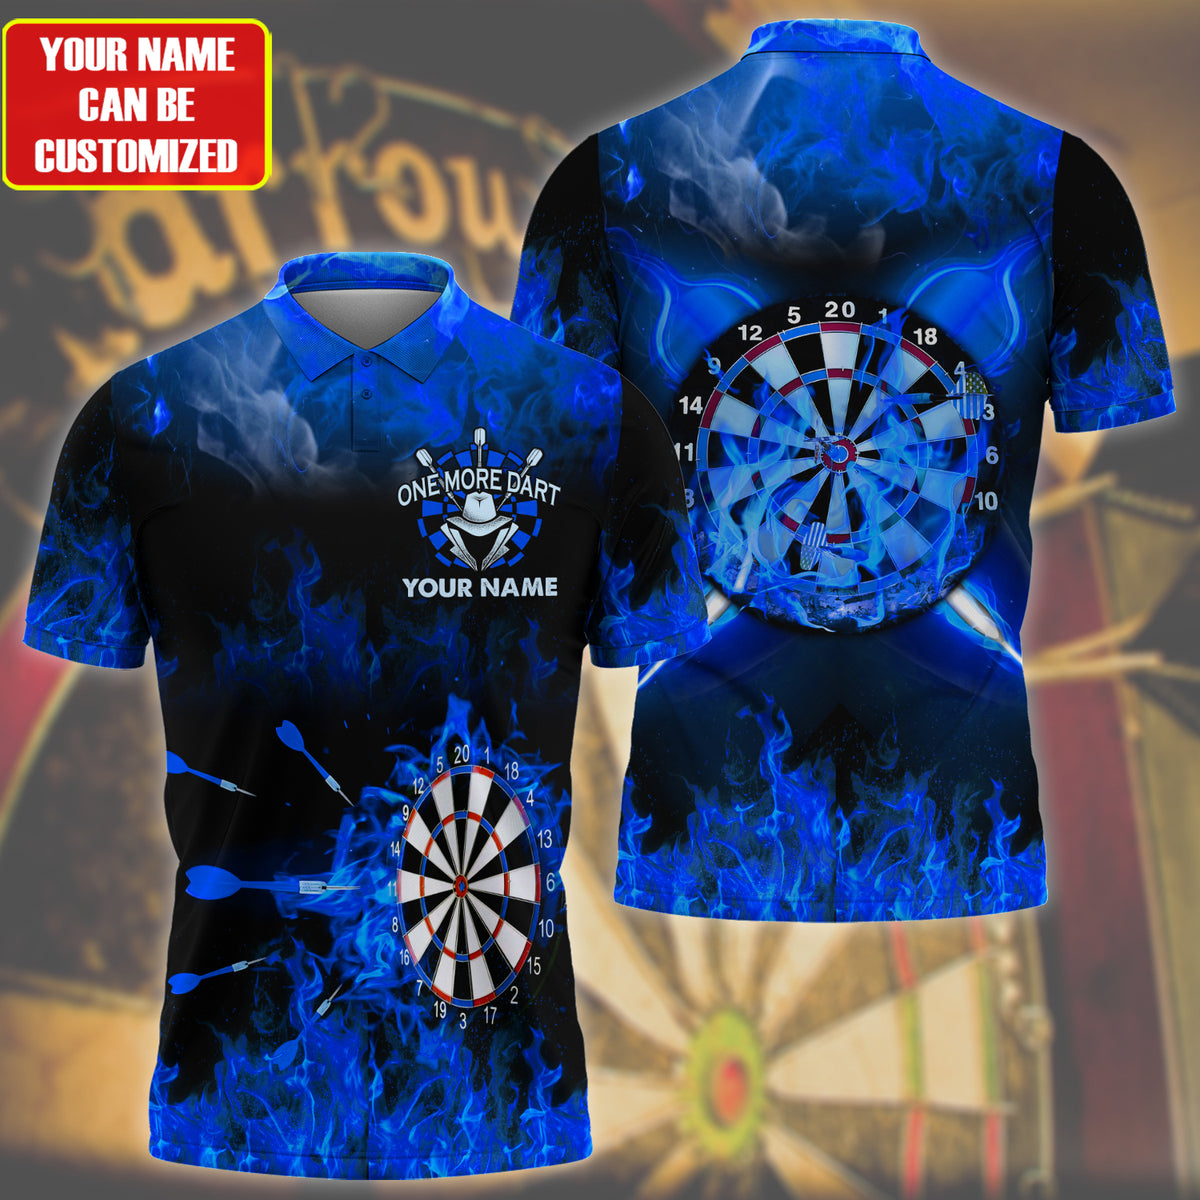 Personalized Name Darts All Over Printed Polo Shirt/ Multicolor Fire On Dart Shirt/ Dart Shirt For Team